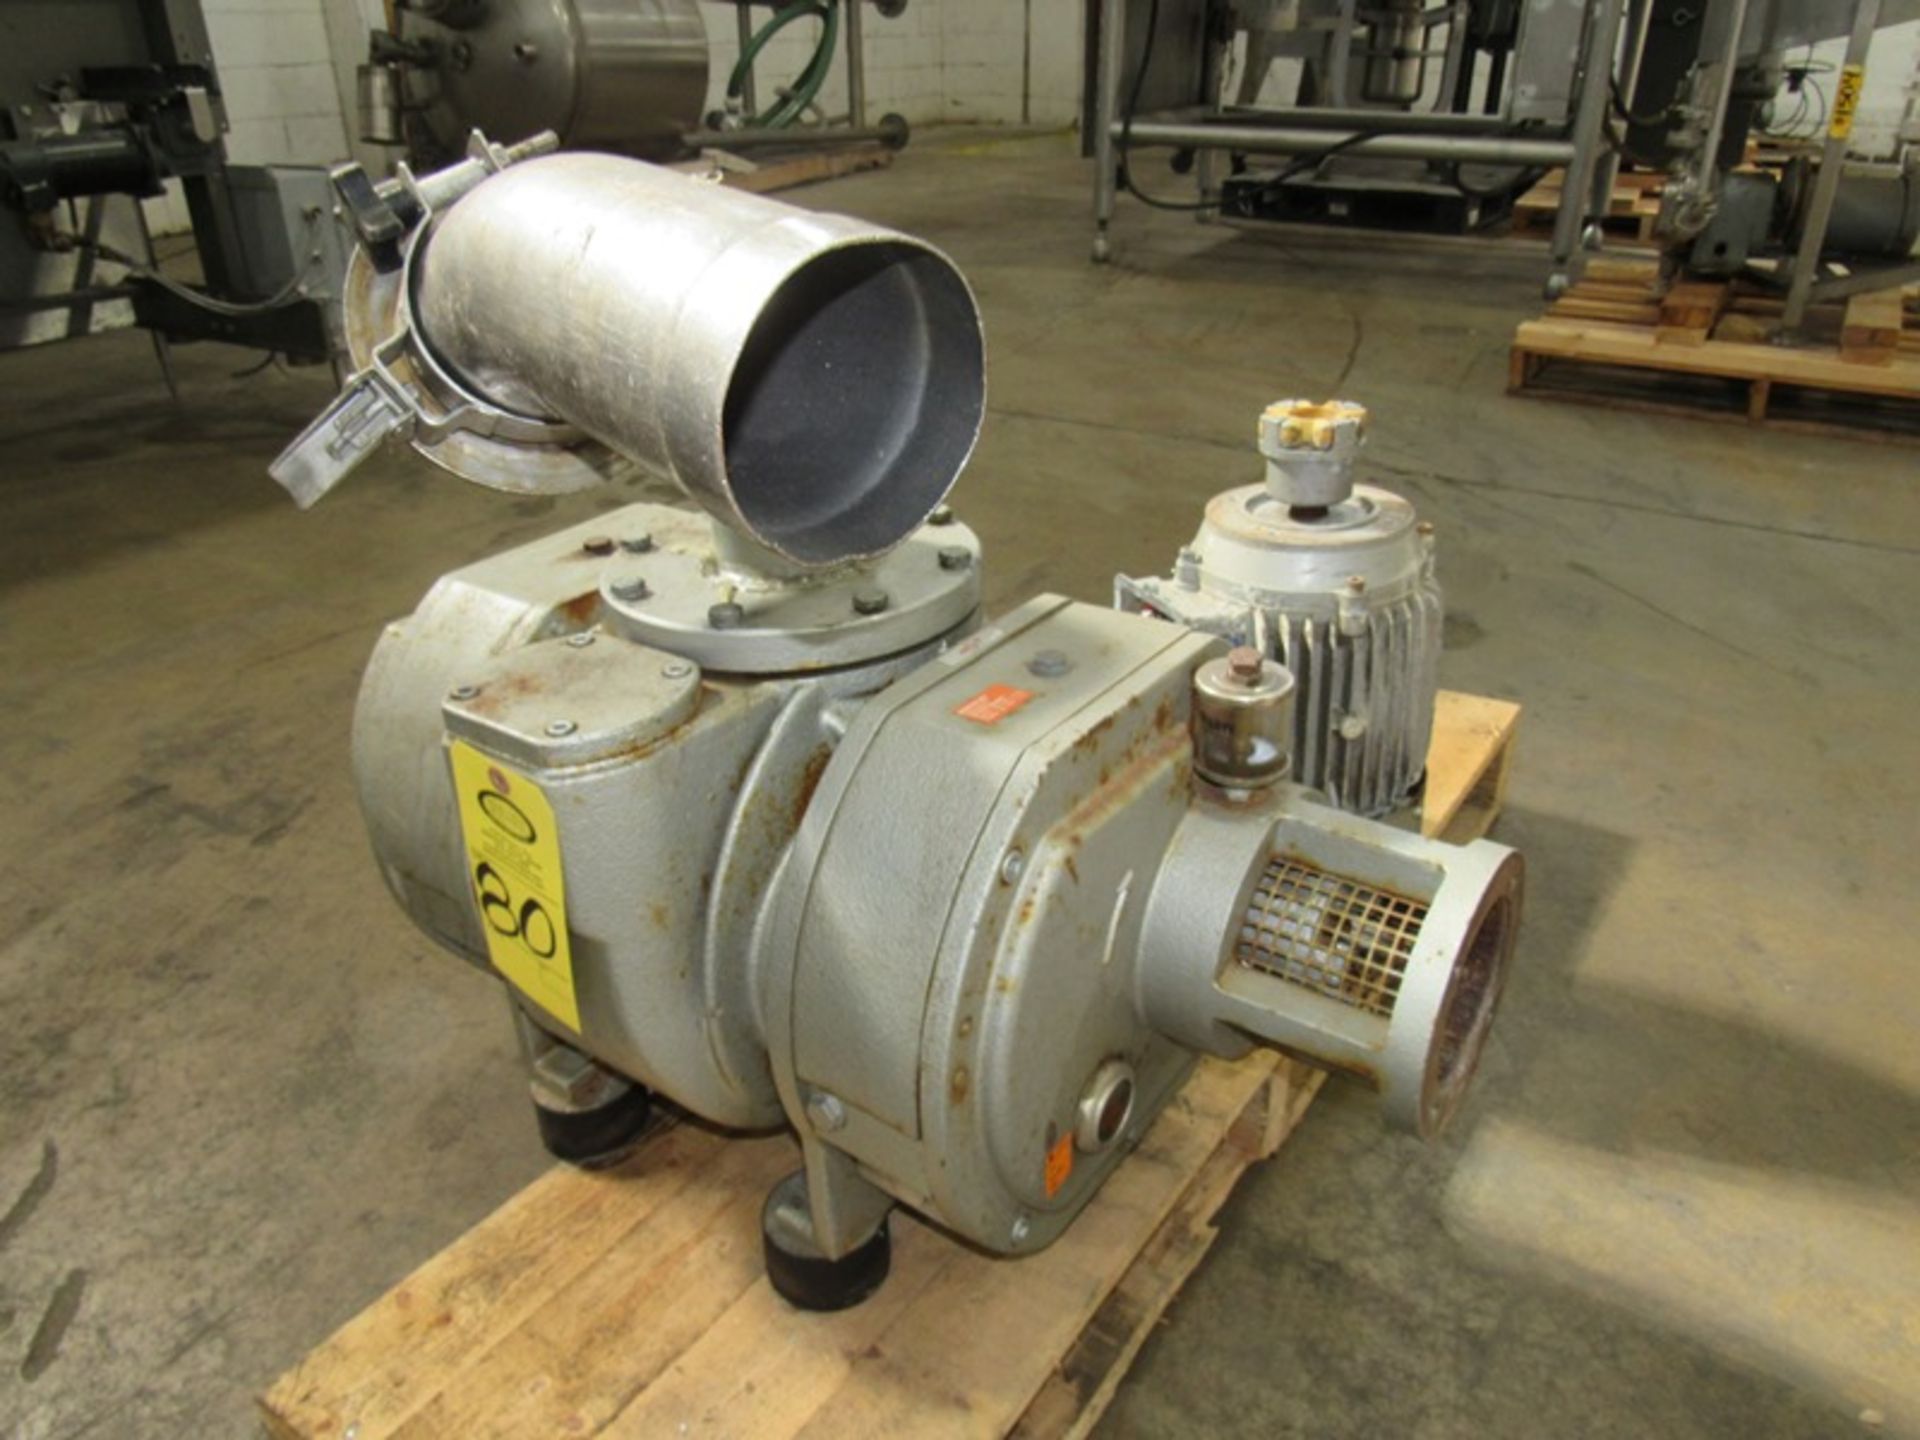 Busch Vacuum Booster Pump, (may be WV1000) 230/460 volt, 3 phase motor (Required Loading Fee $50-